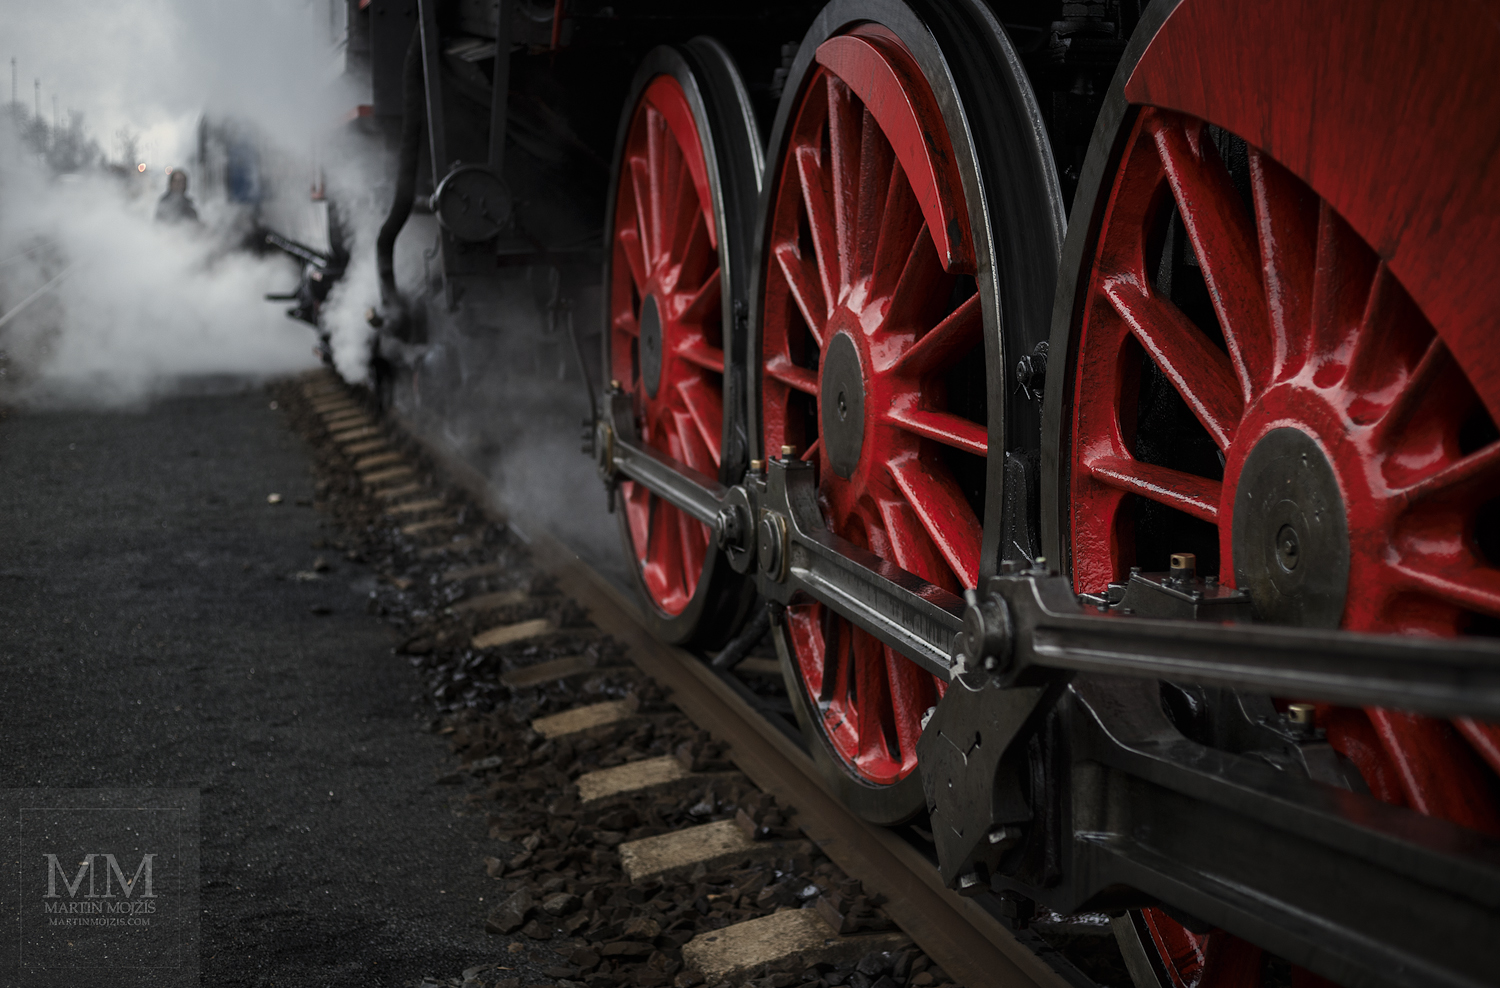 Fine Art large format photograph of the wheels of the steam locomotive 475.179 Noblewoman. Martin Mojzis.